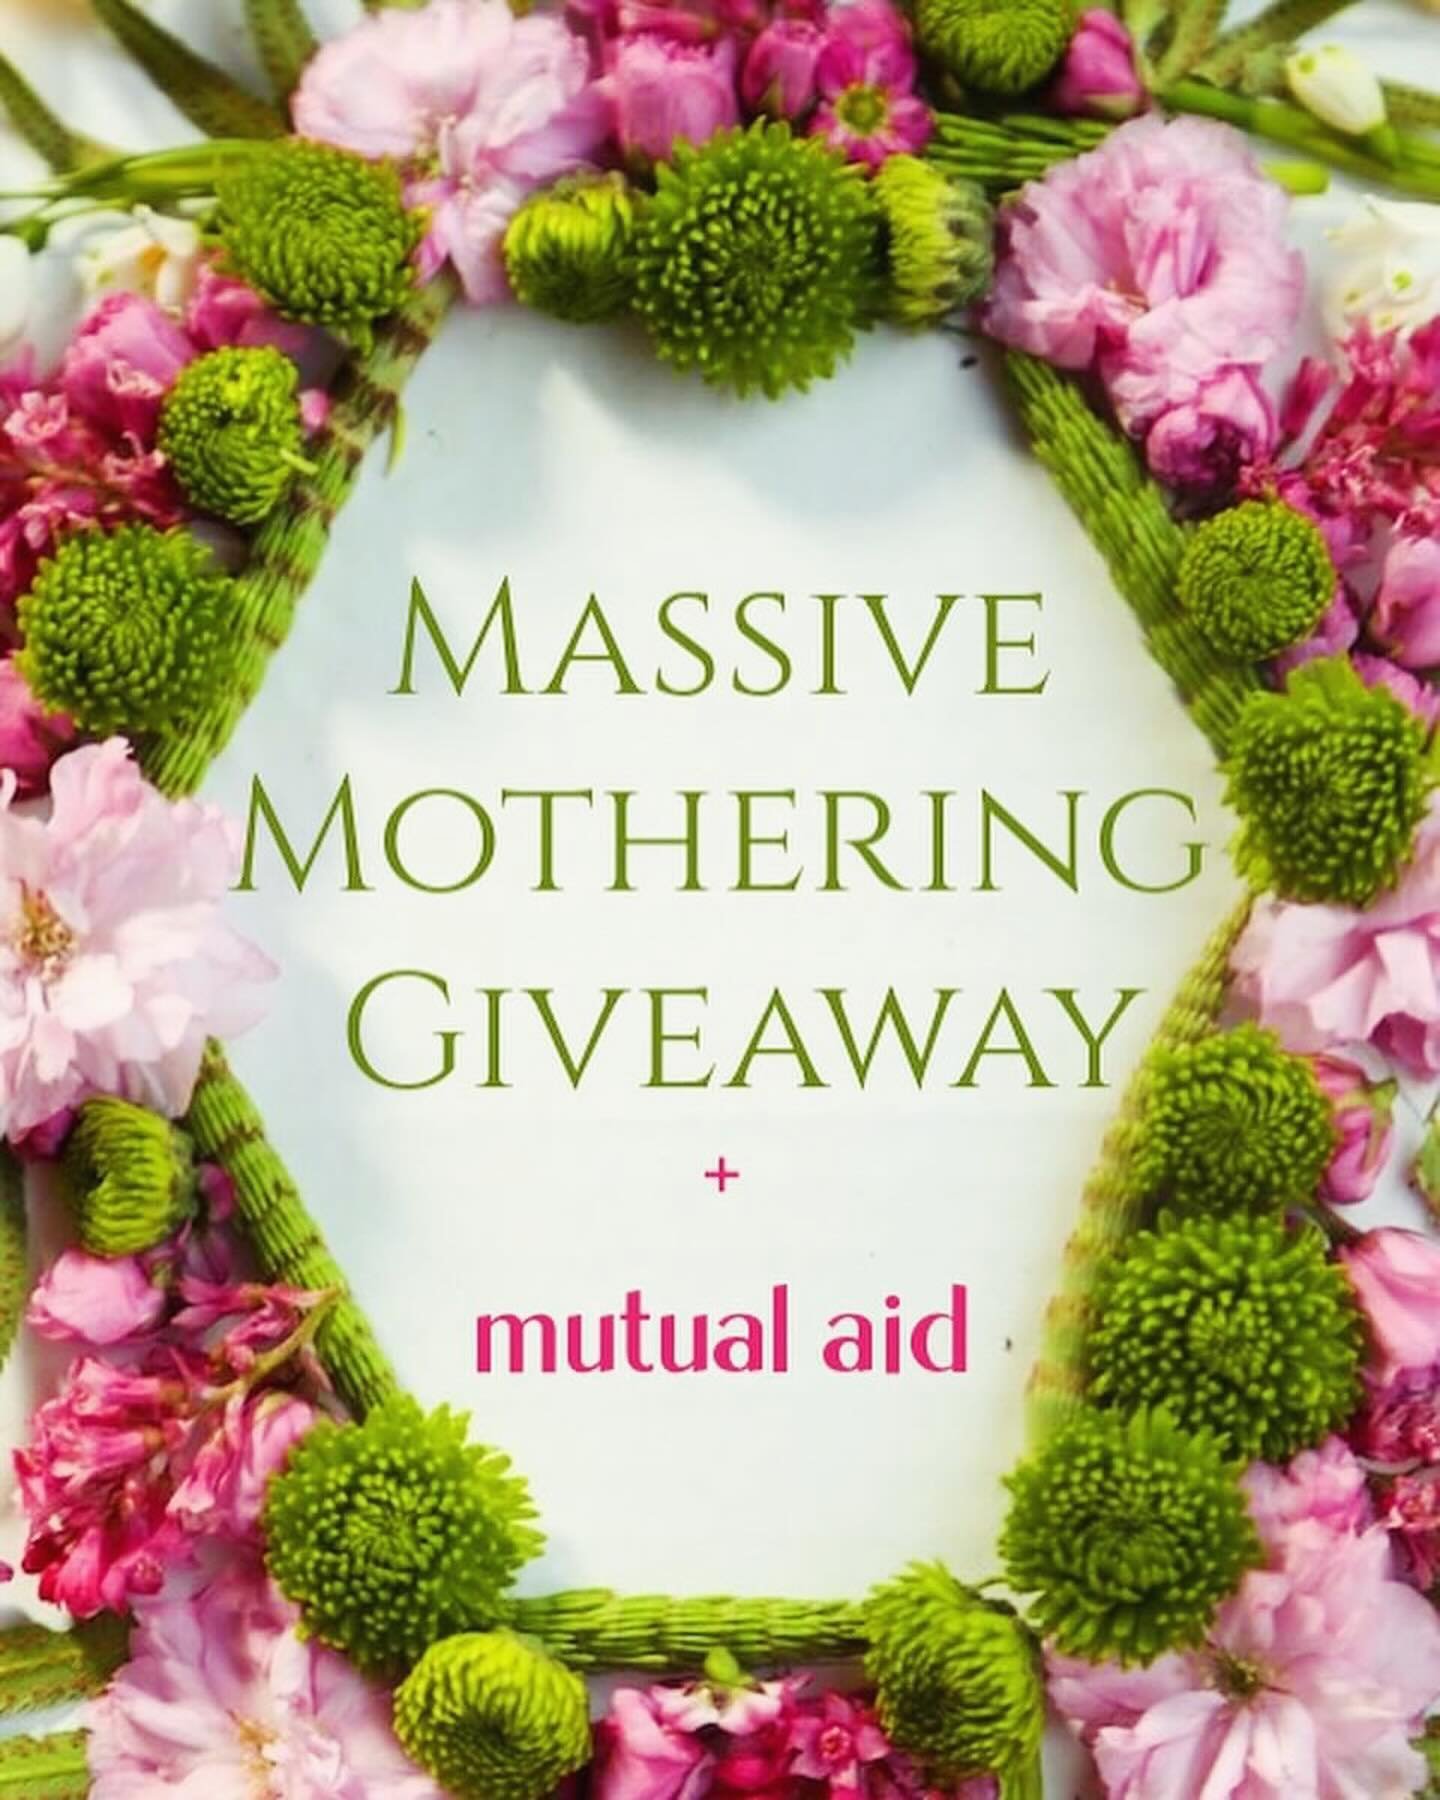 🪻🌸🪻Massive Mothering Giveaway + Mutual Aid Fundraiser- 

I have had the extreme joy of joining with some femme creators + healers from within my community to offer an absolutely gigantic giveaway of some of our favorite hand made, heart led offeri